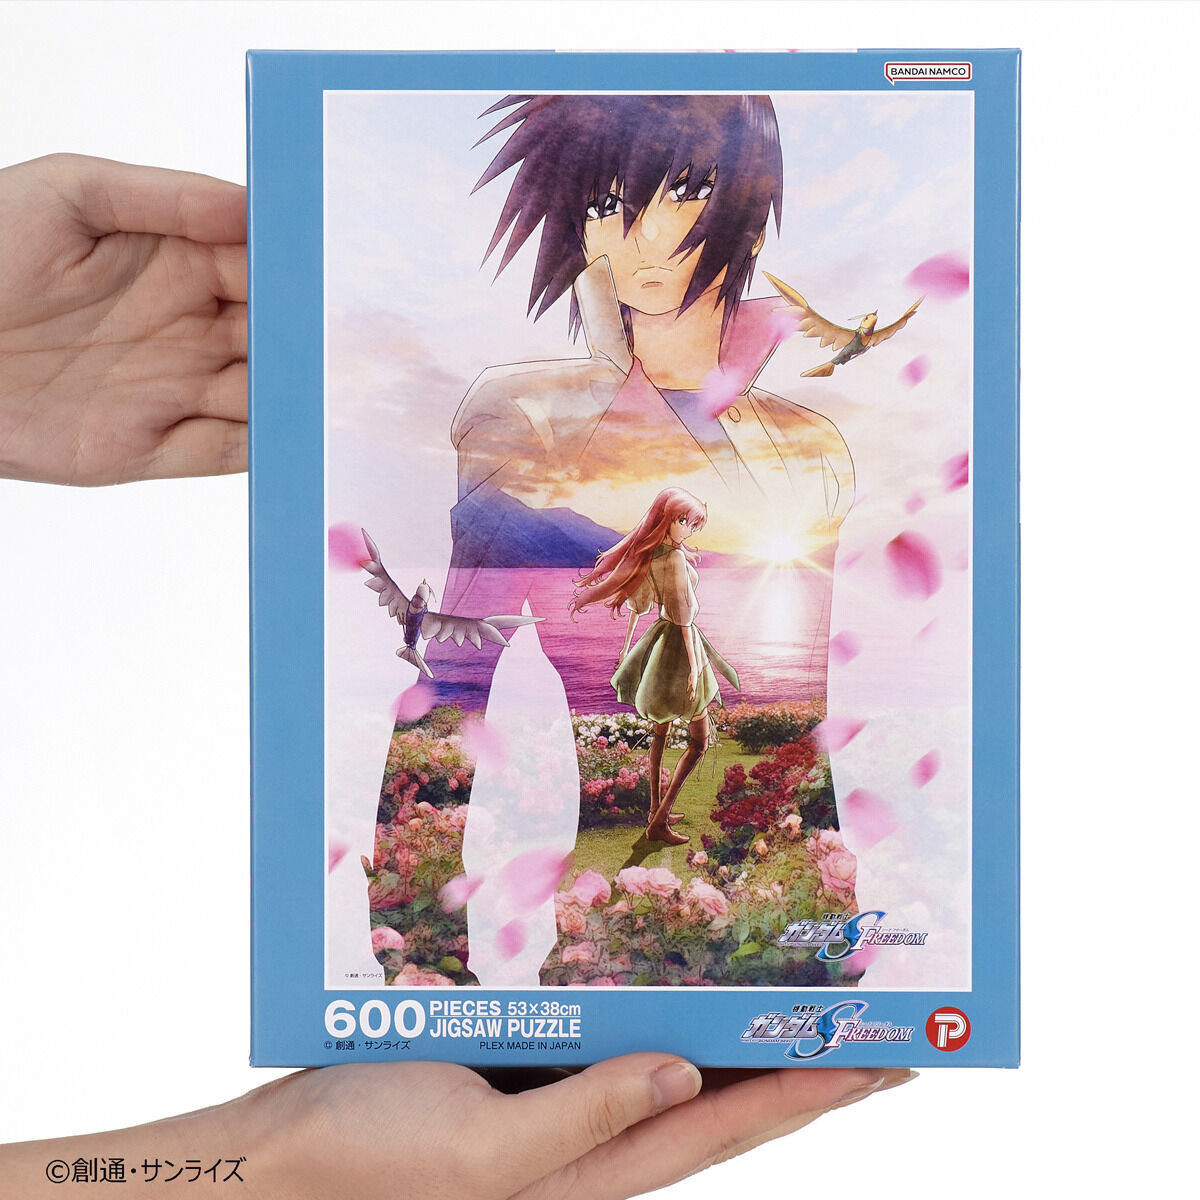 Mobile Suit Gundam Seed Freedom 600 Pieces Jigsaw Puzzler Color)